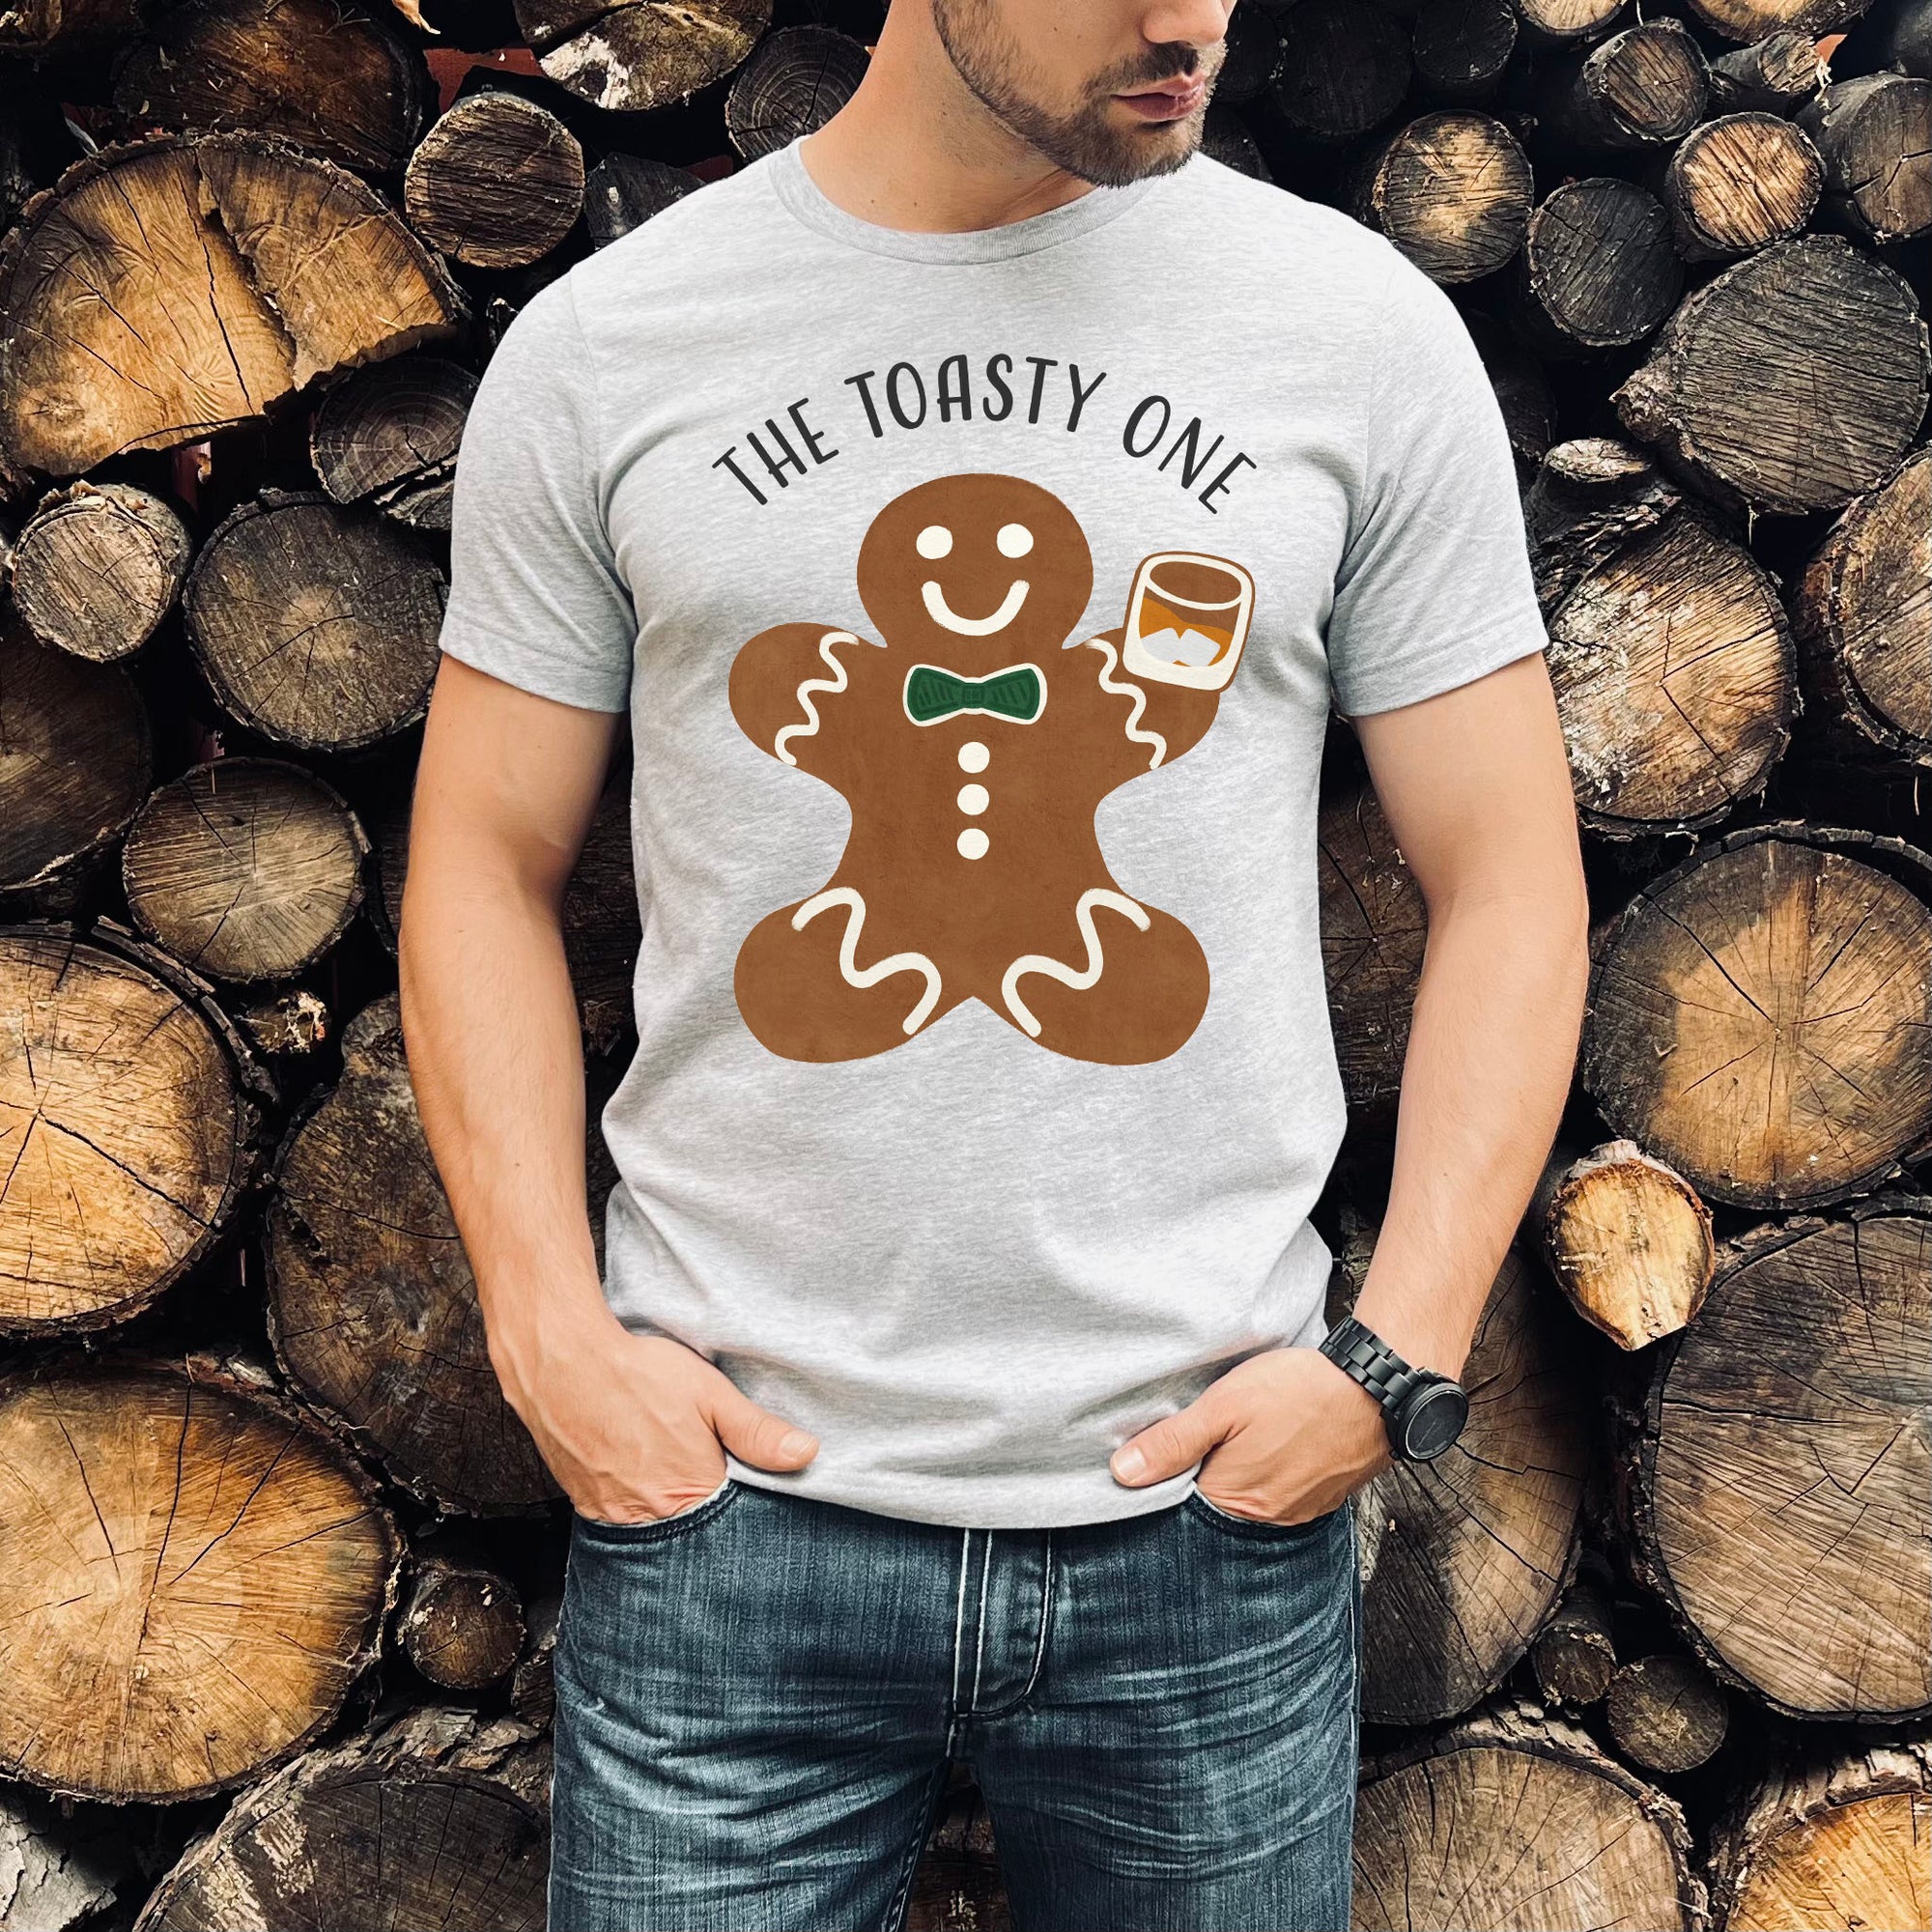 The Toasty One Gingerbread Man Shirt